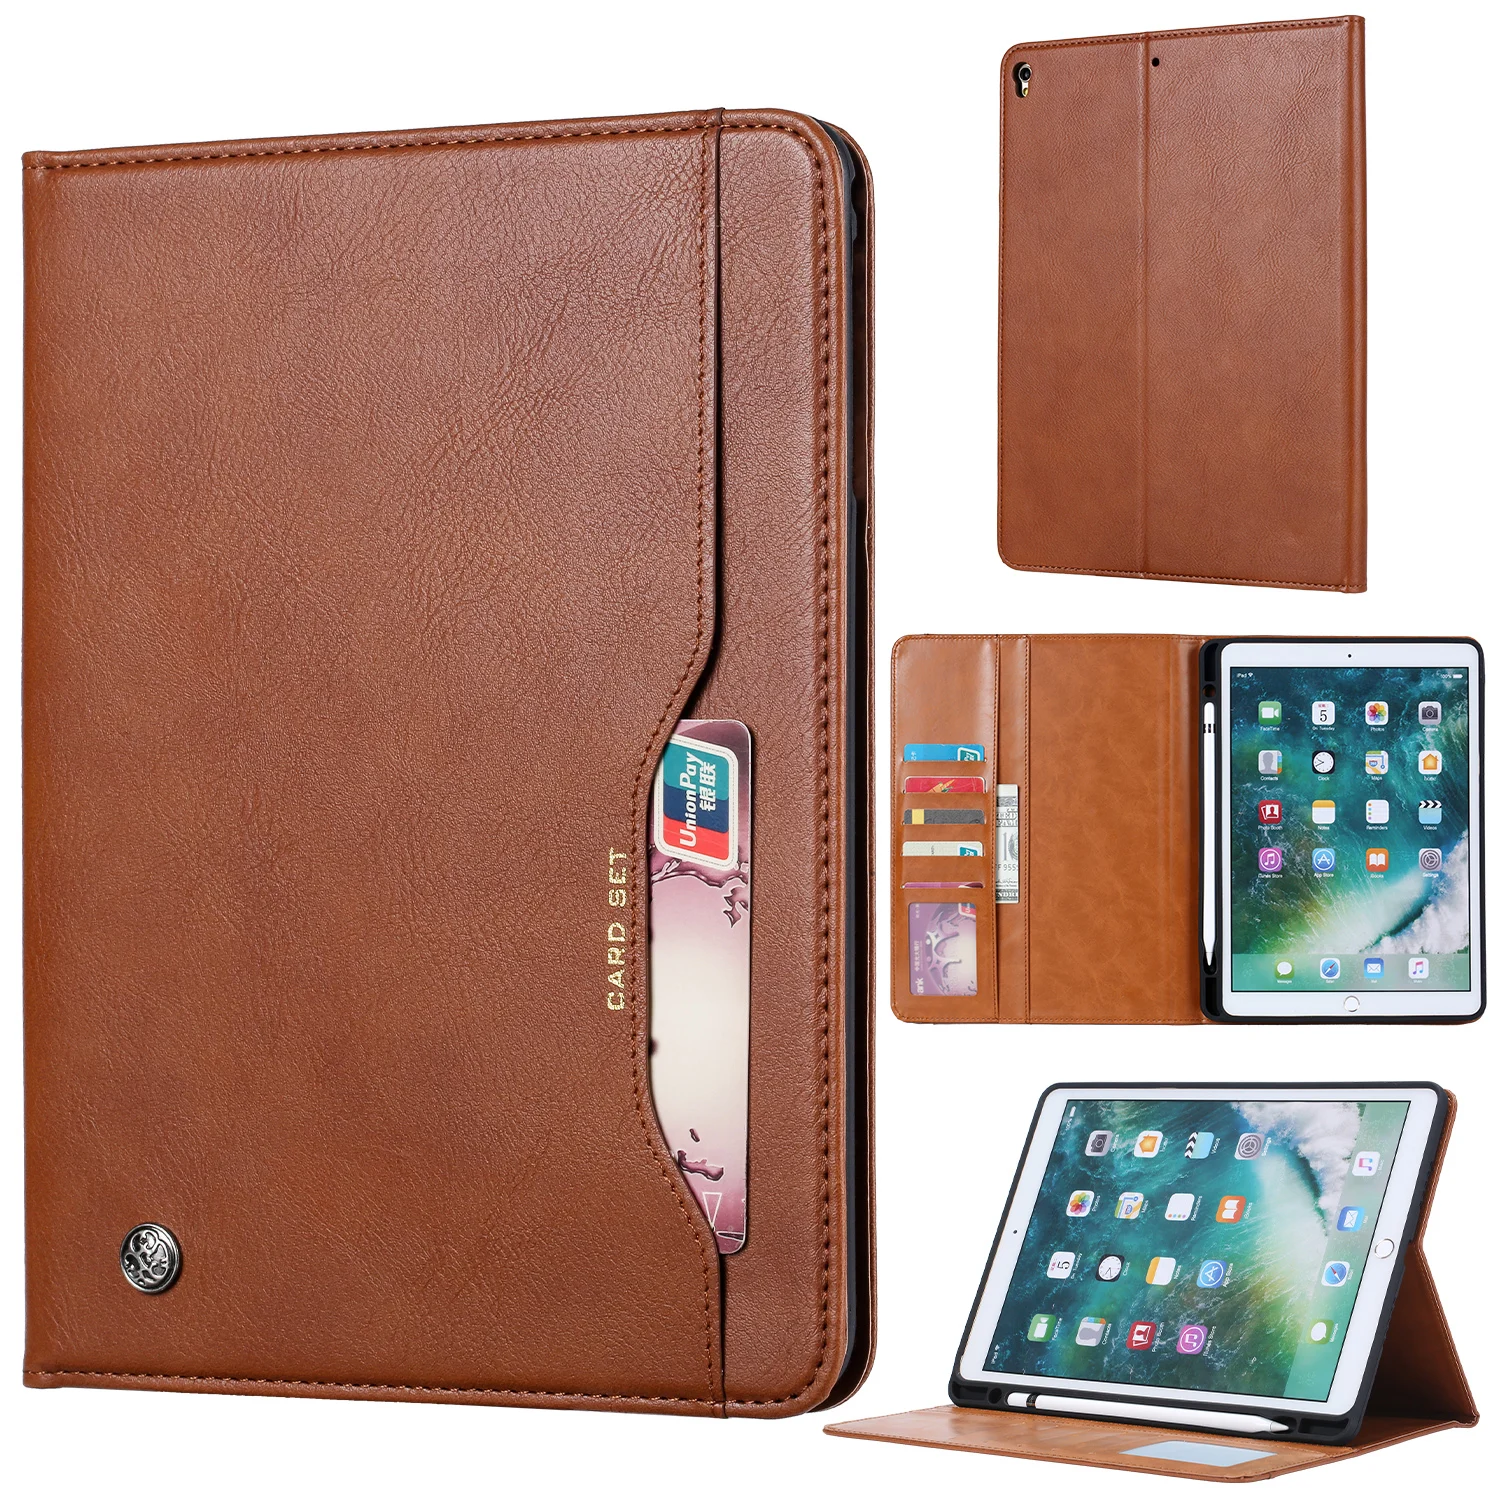 Leather Flip Case for iPad 10.2 7th 8th 2019 2020 Air 2 3 4 4th Pro 9.7 10.5 11 5th 6th 2017 2018 Smart Business Tablet Shell